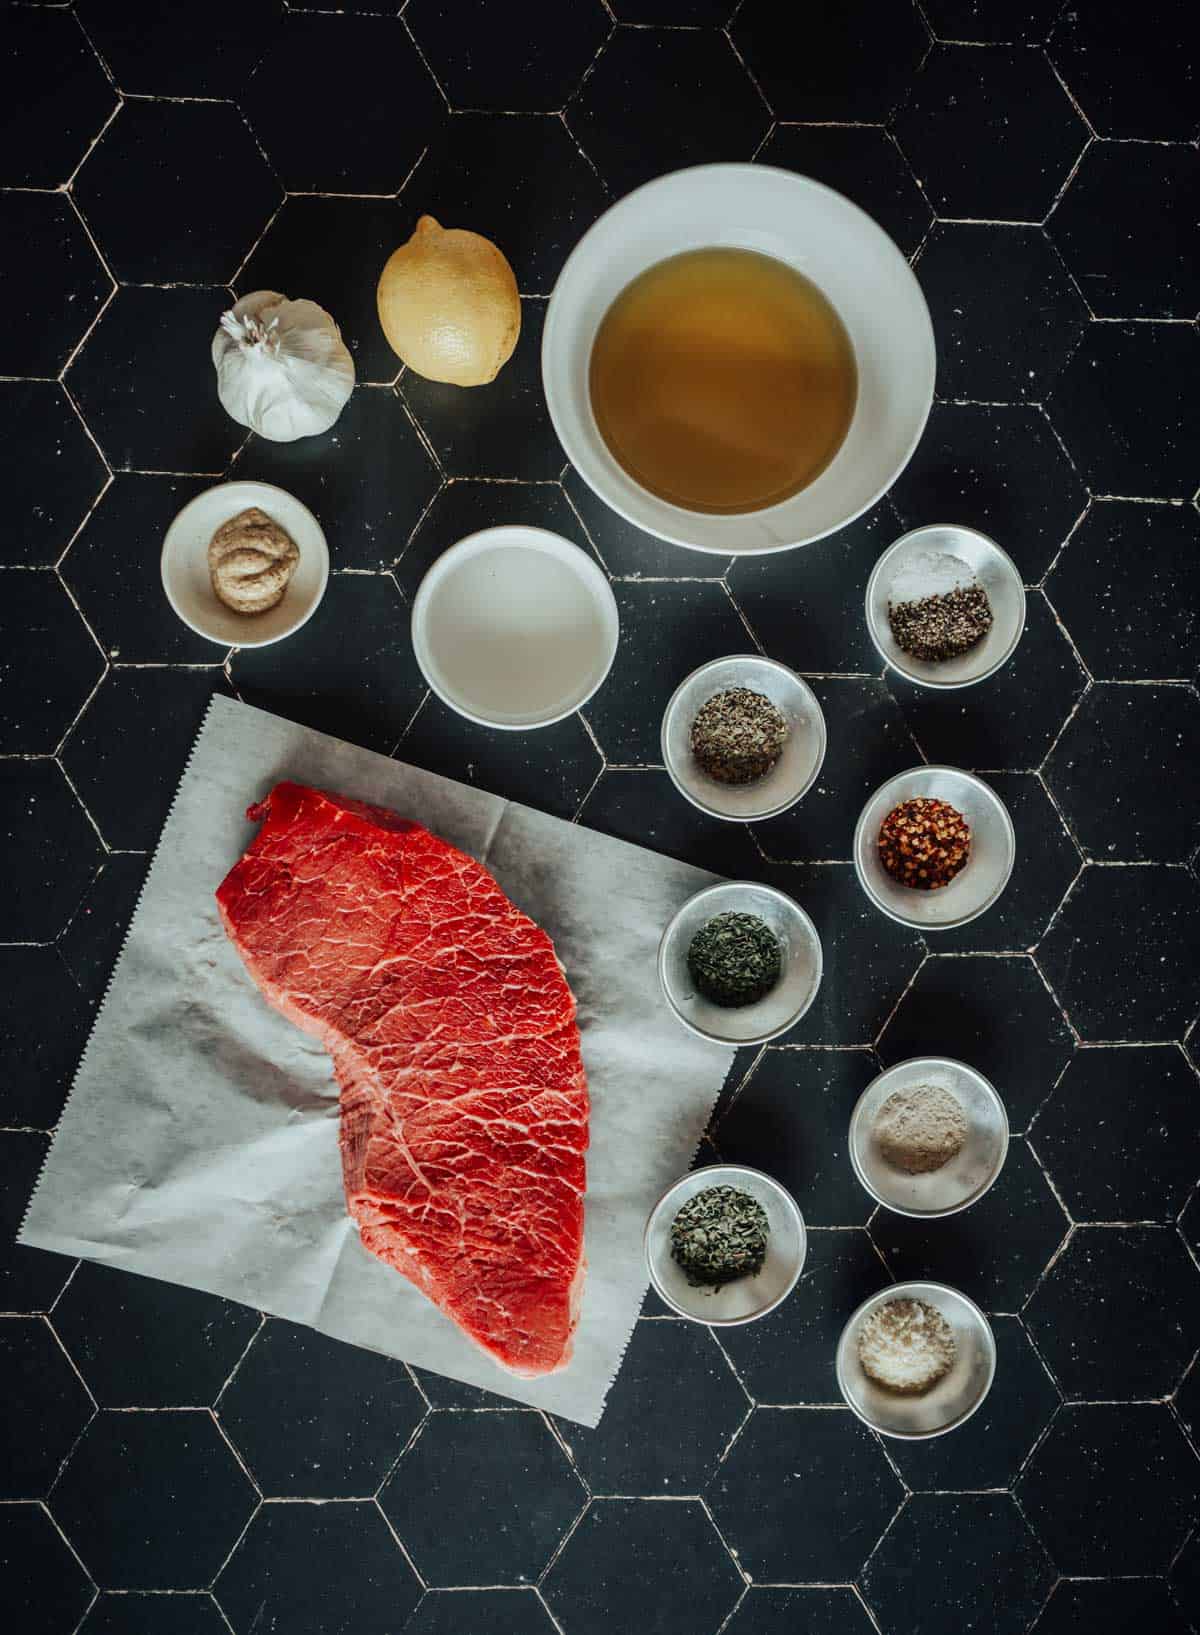 Raw london broil on parchment paper surrounded by bowls of spices, a garlic bulb, a lemon, and a bowl of oil, all placed on a black surface.